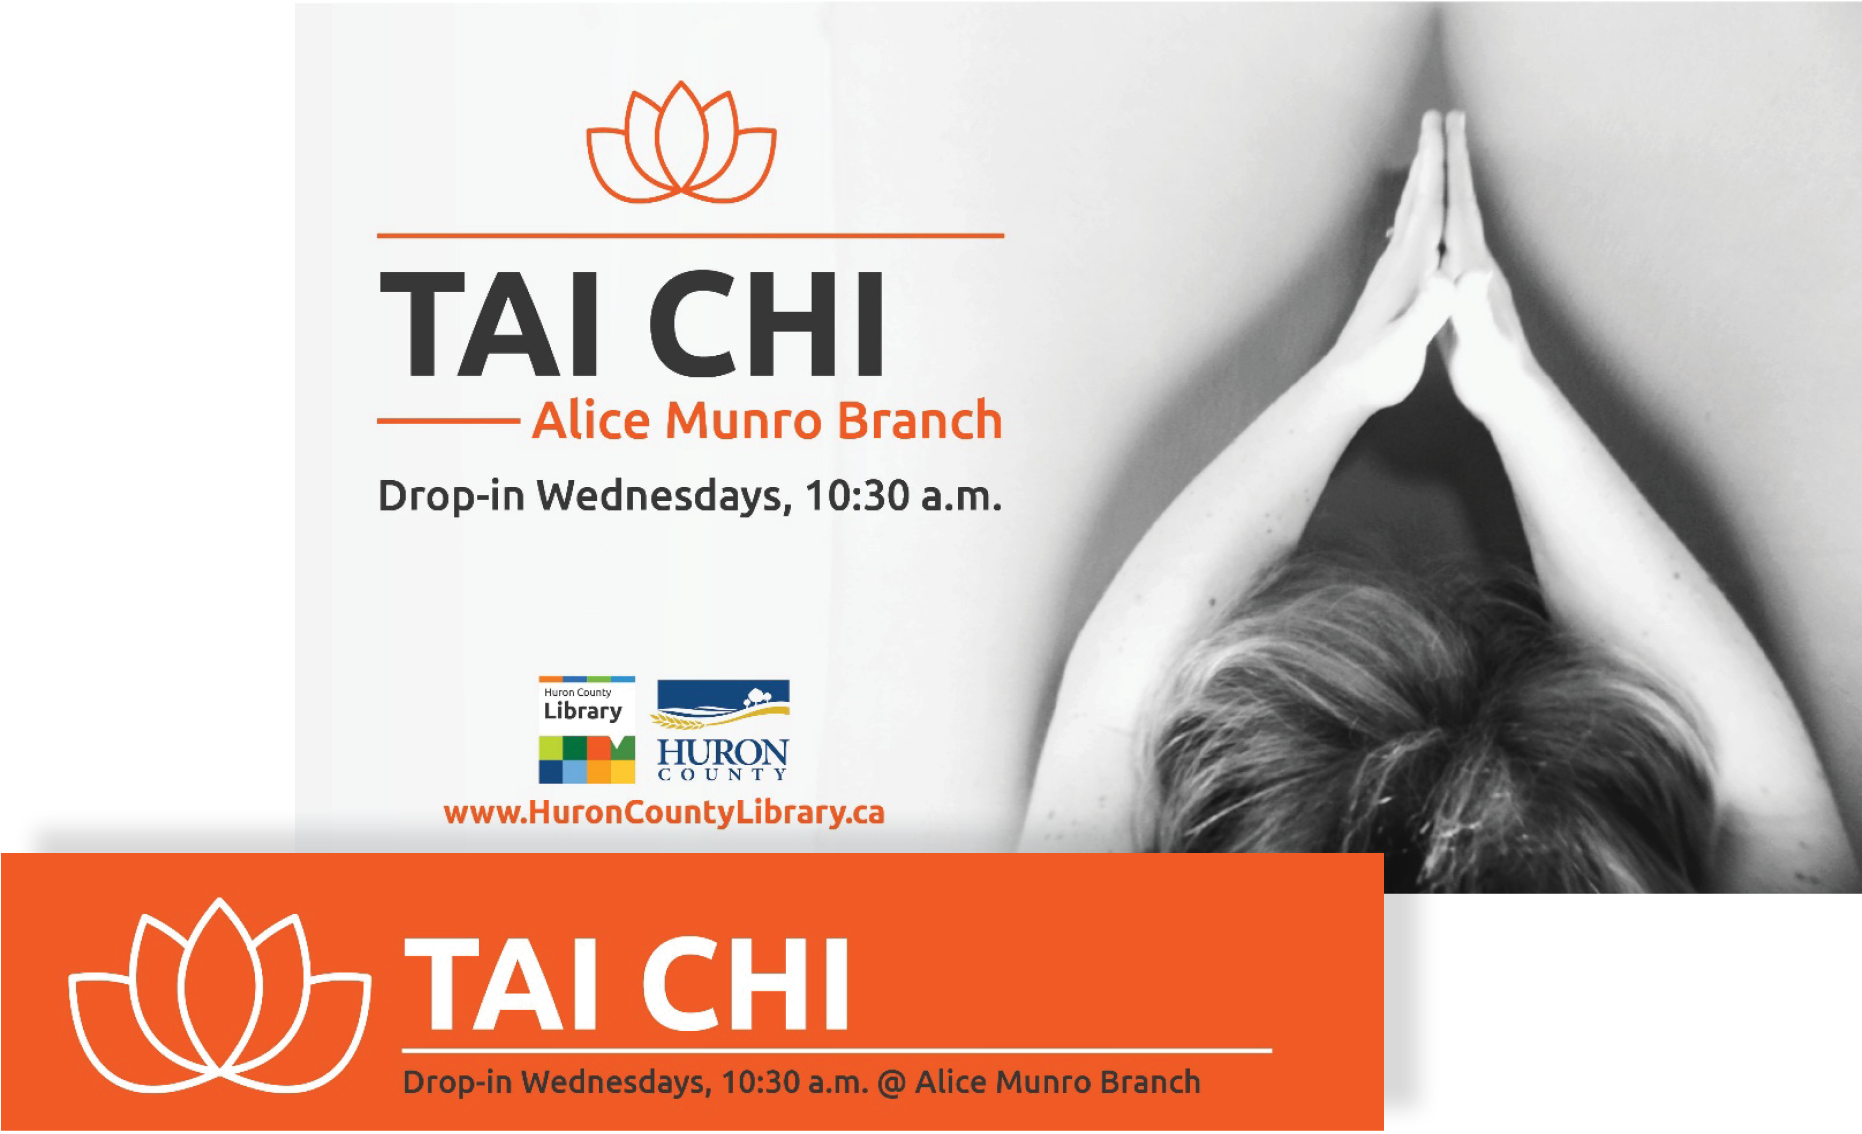 Image of a poster and event banner promoting Tai Chi in Wingham. Poster features a black and white image of a head and hands in prayer pose. Event banner features an illustration of a lotus flower.